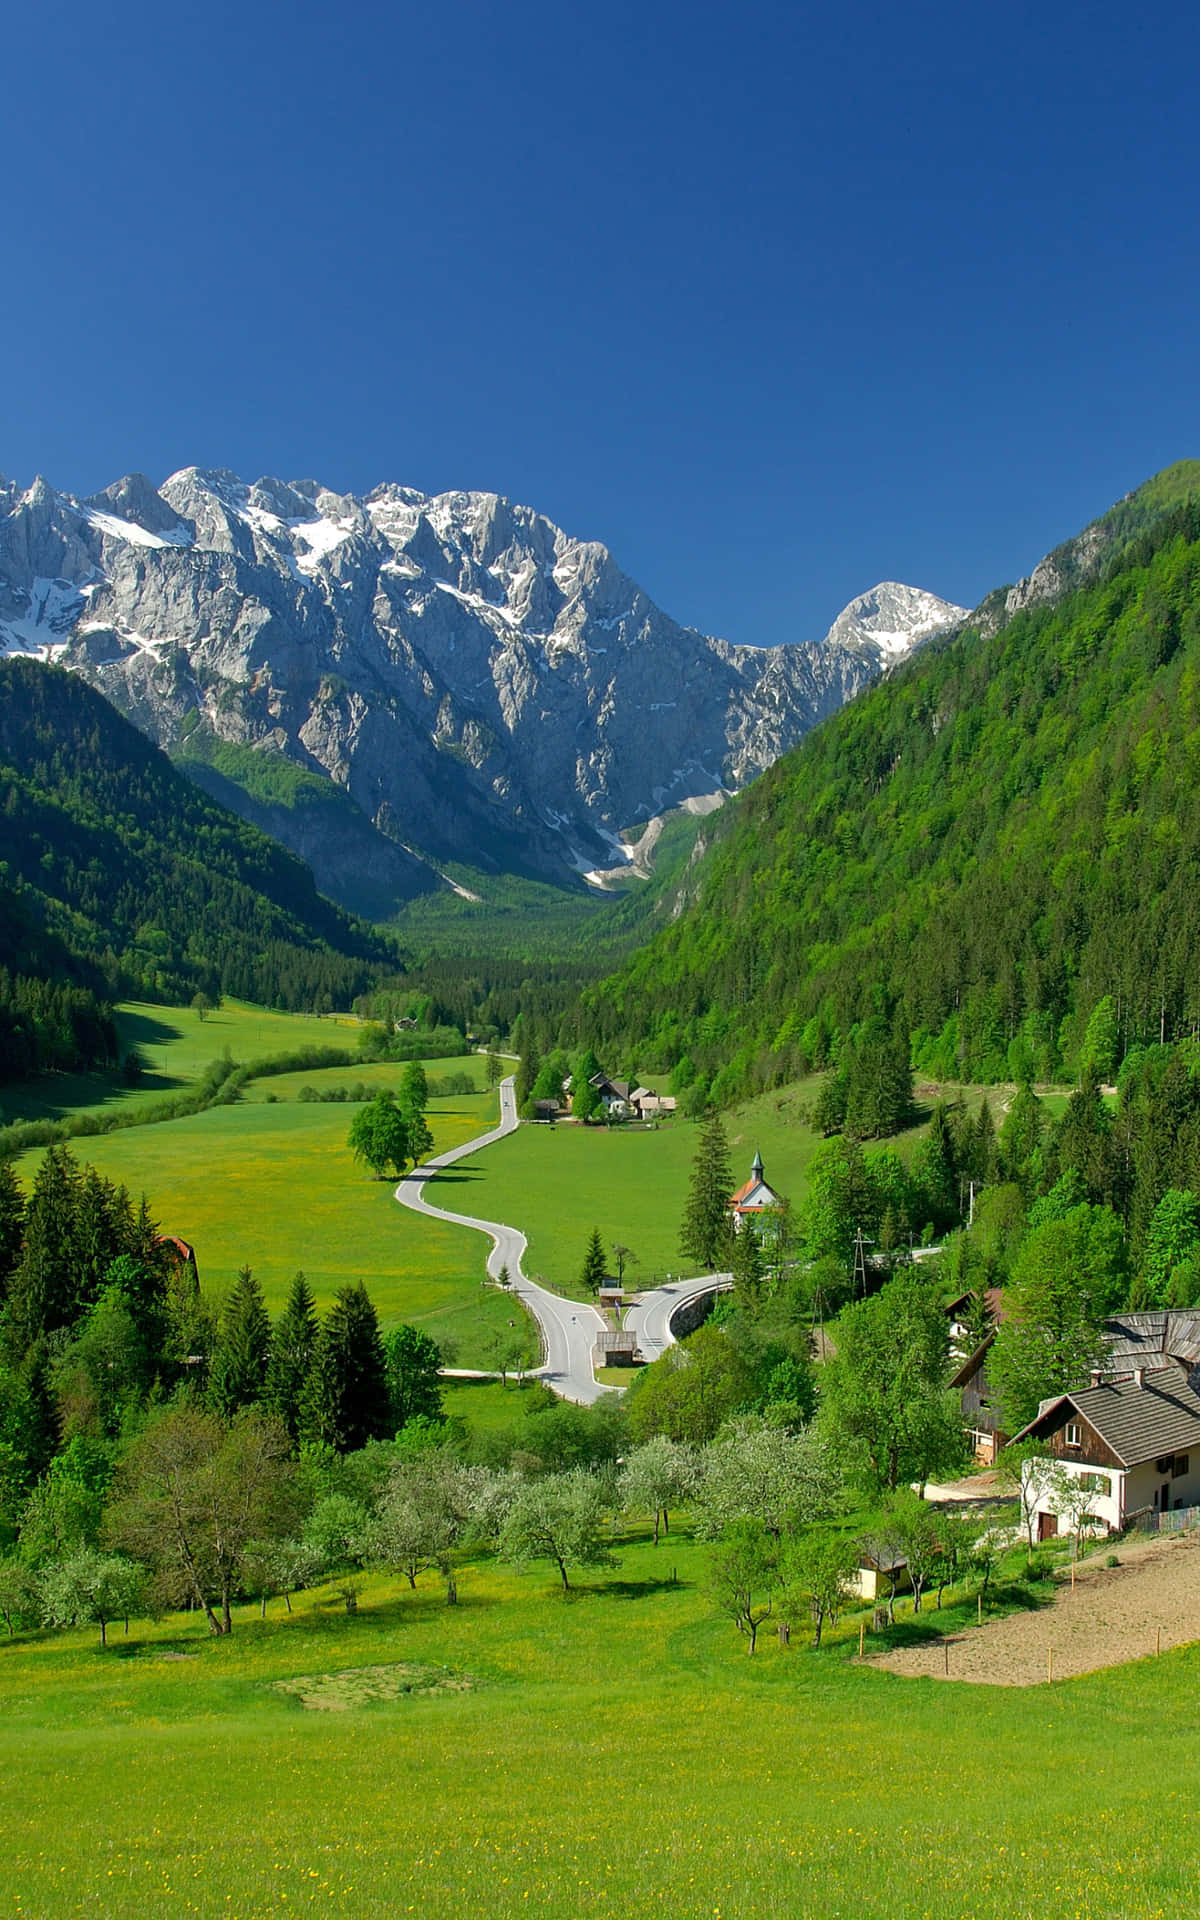 A peaceful valley surrounded by lush greenery